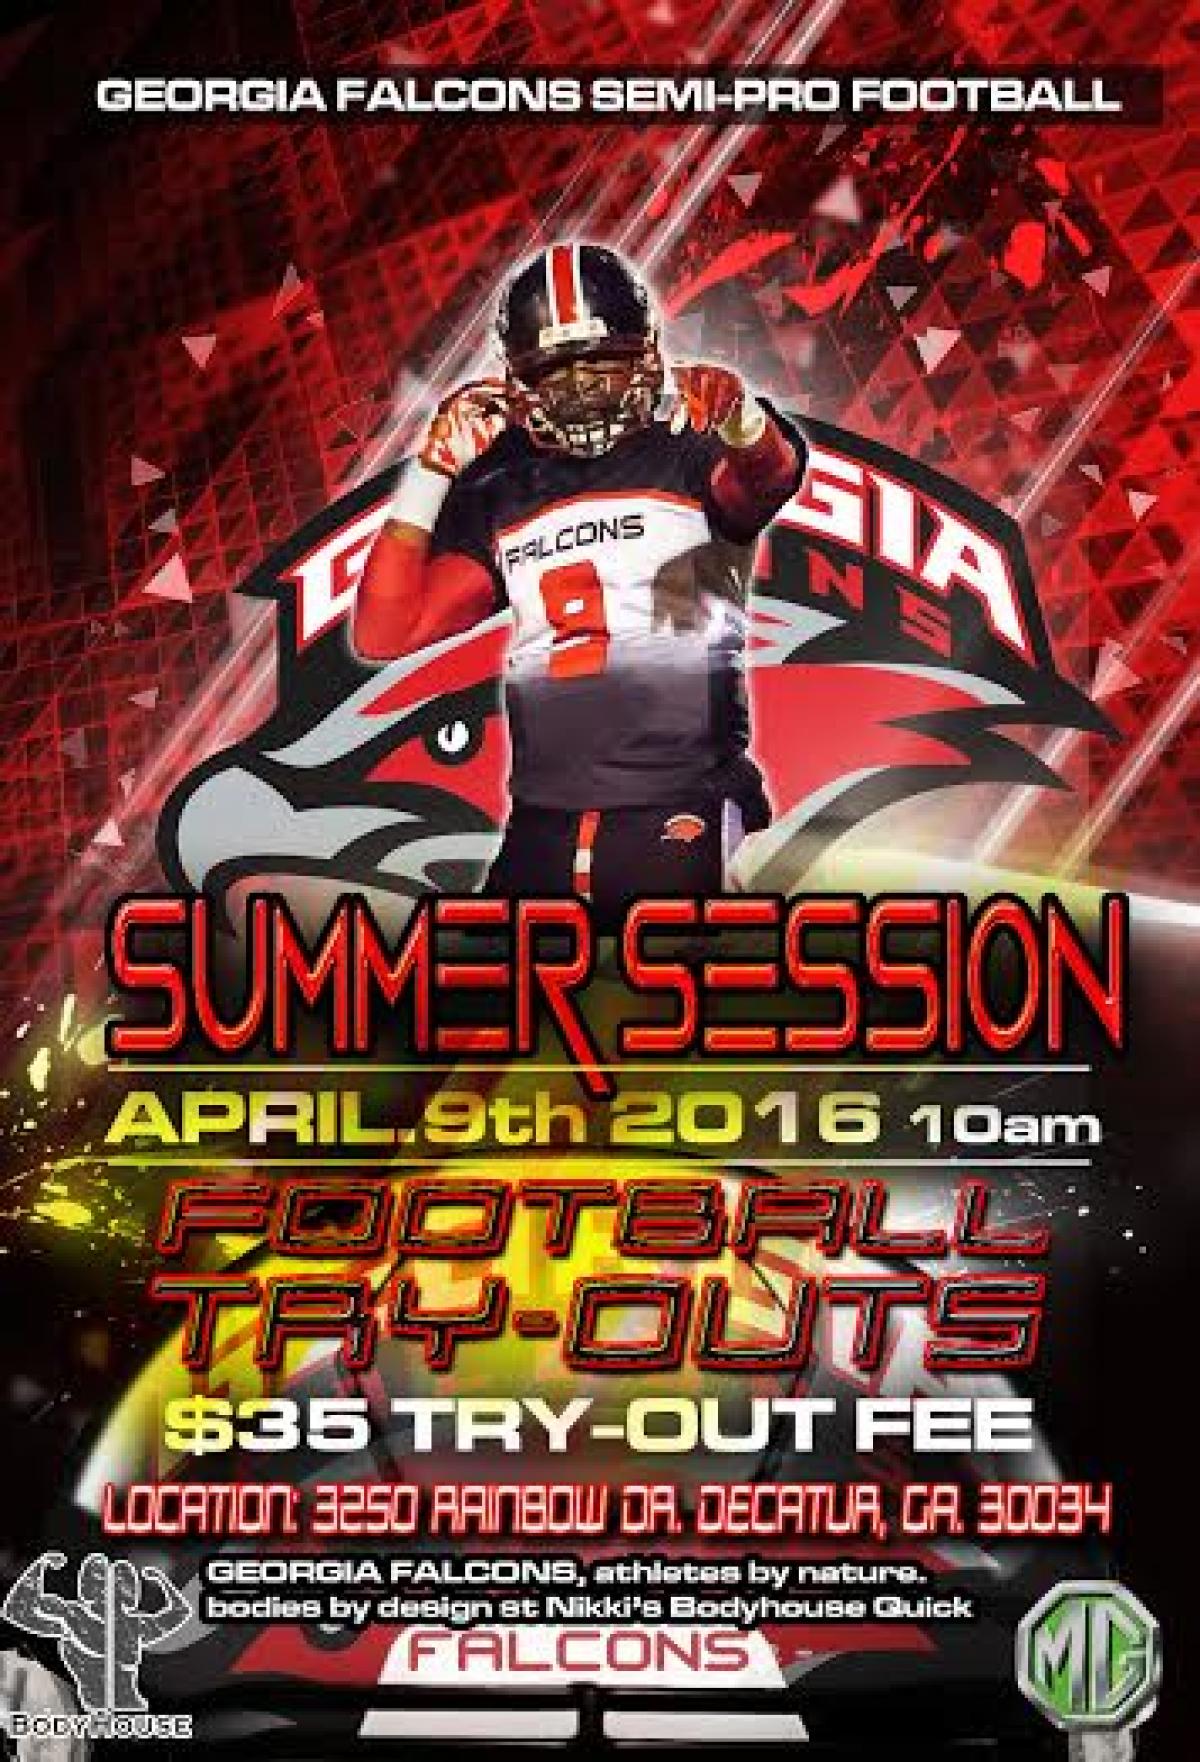 Georgia Falcons are holding open Try Out